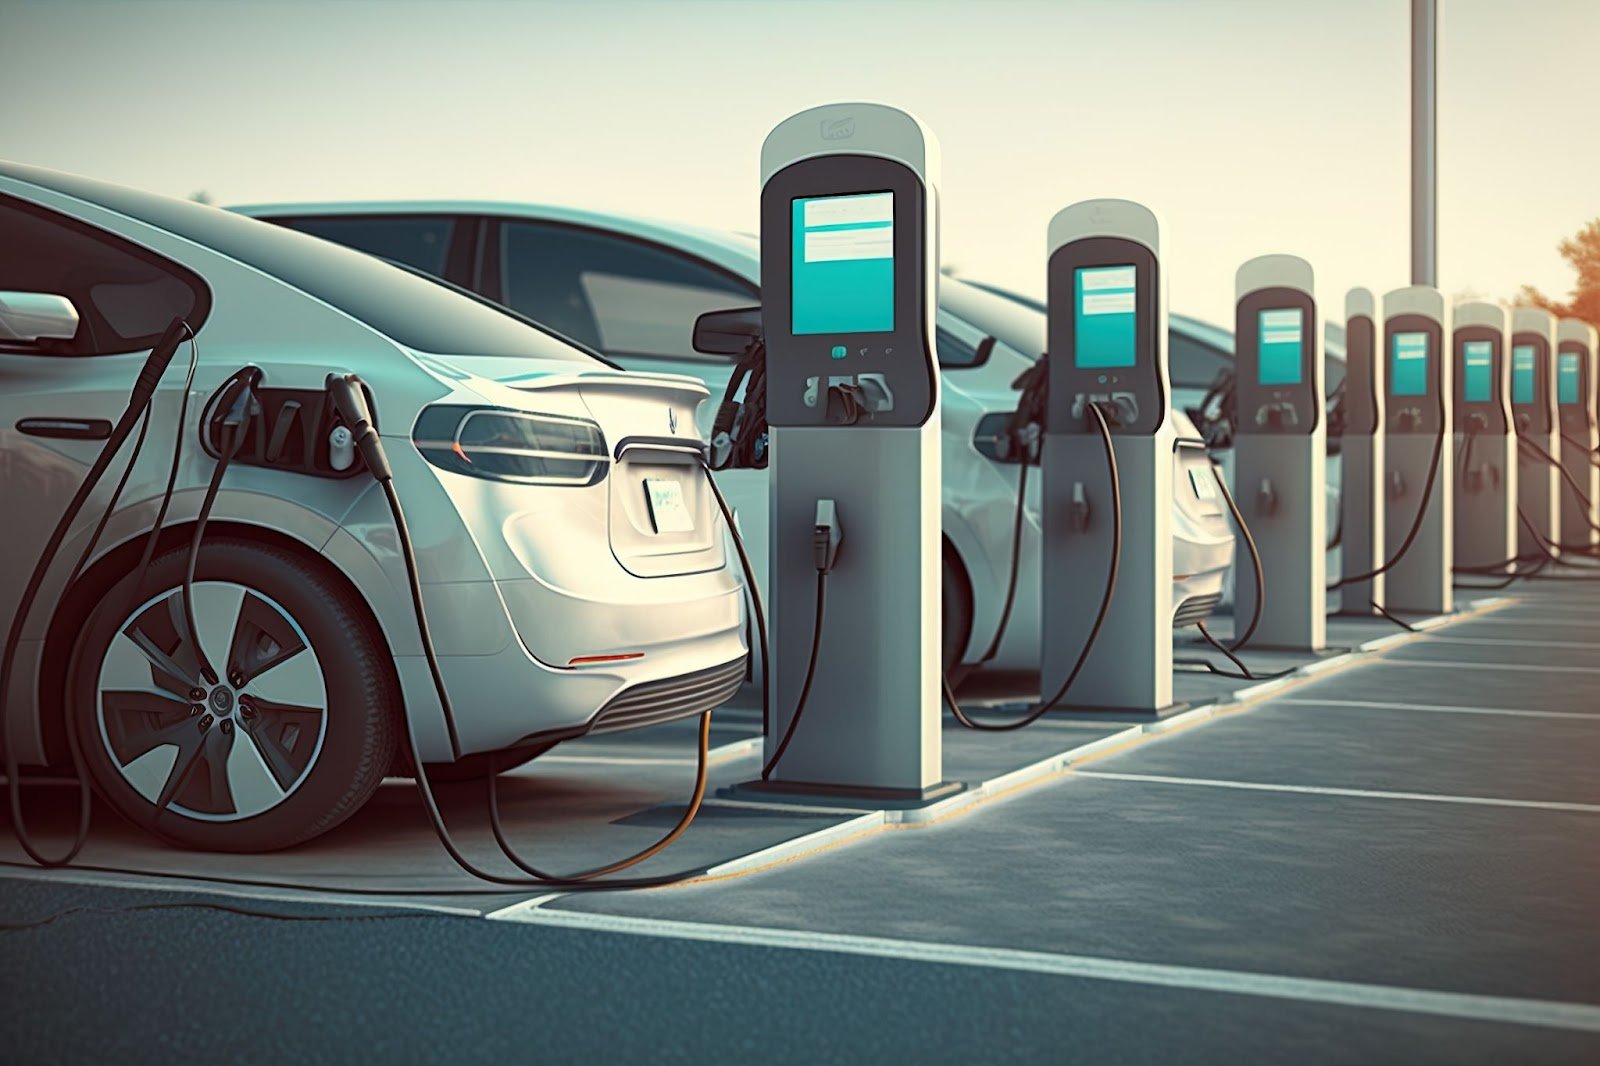 El Paso receives US$15 million to install 74 electric vehicle charging stations